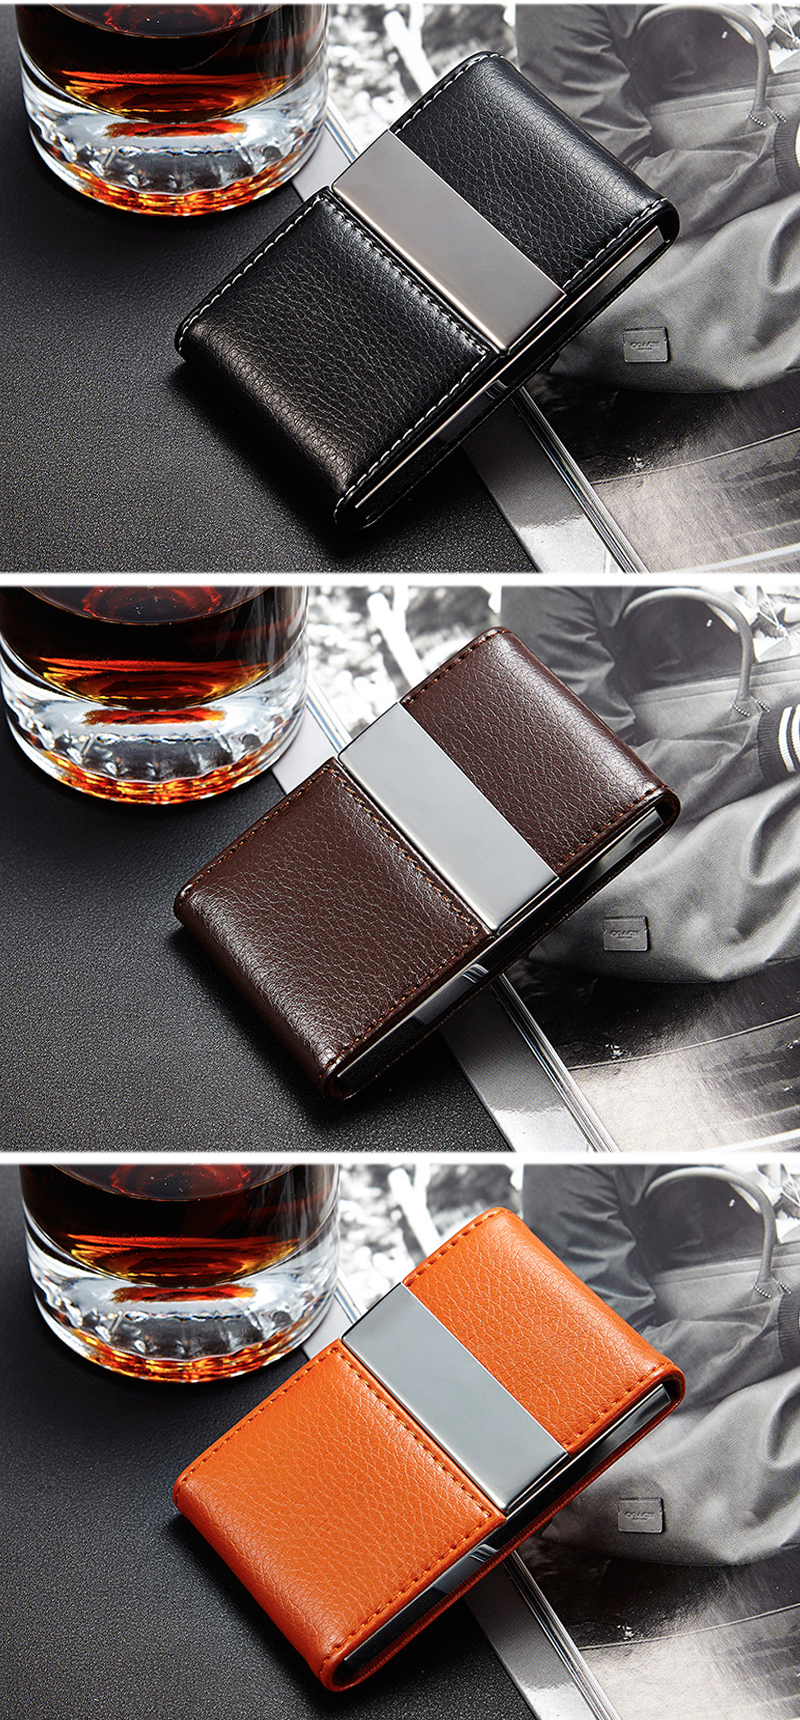 IPReereg-PU-Leather-Card-Holder-Double-Open-Credit-Card-Case-ID-Card-Storage-Box-Business-Travel-1364325-2